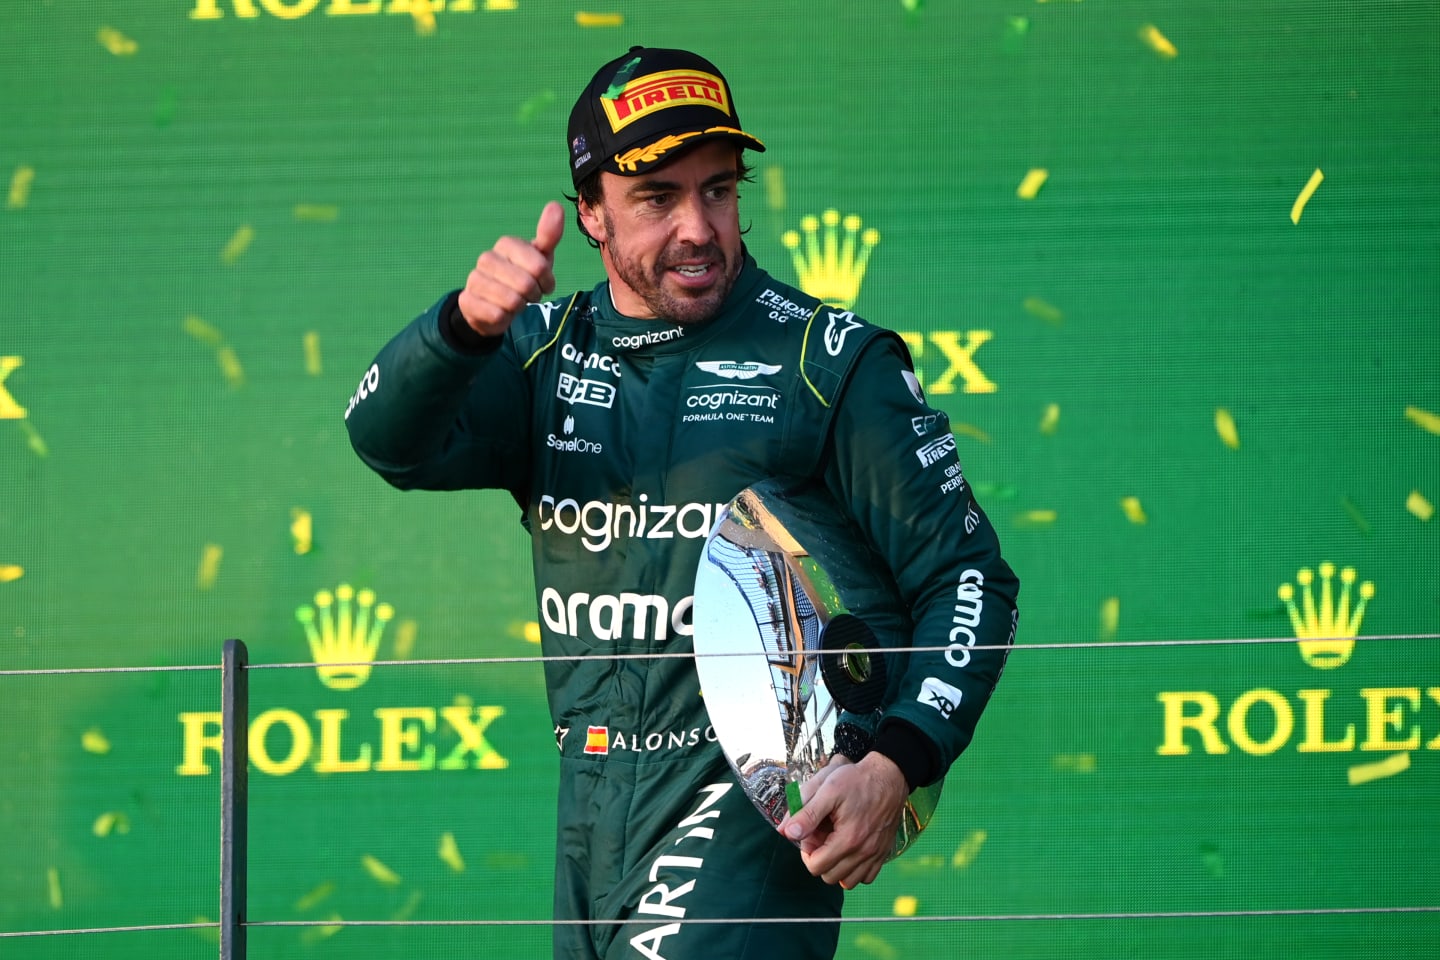 MELBOURNE, AUSTRALIA - APRIL 02: Third placed Fernando Alonso of Spain and Aston Martin F1 Team celebrates on the podium during the F1 Grand Prix of Australia at Albert Park Grand Prix Circuit on April 02, 2023 in Melbourne, Australia. (Photo by Quinn Rooney/Getty Images)